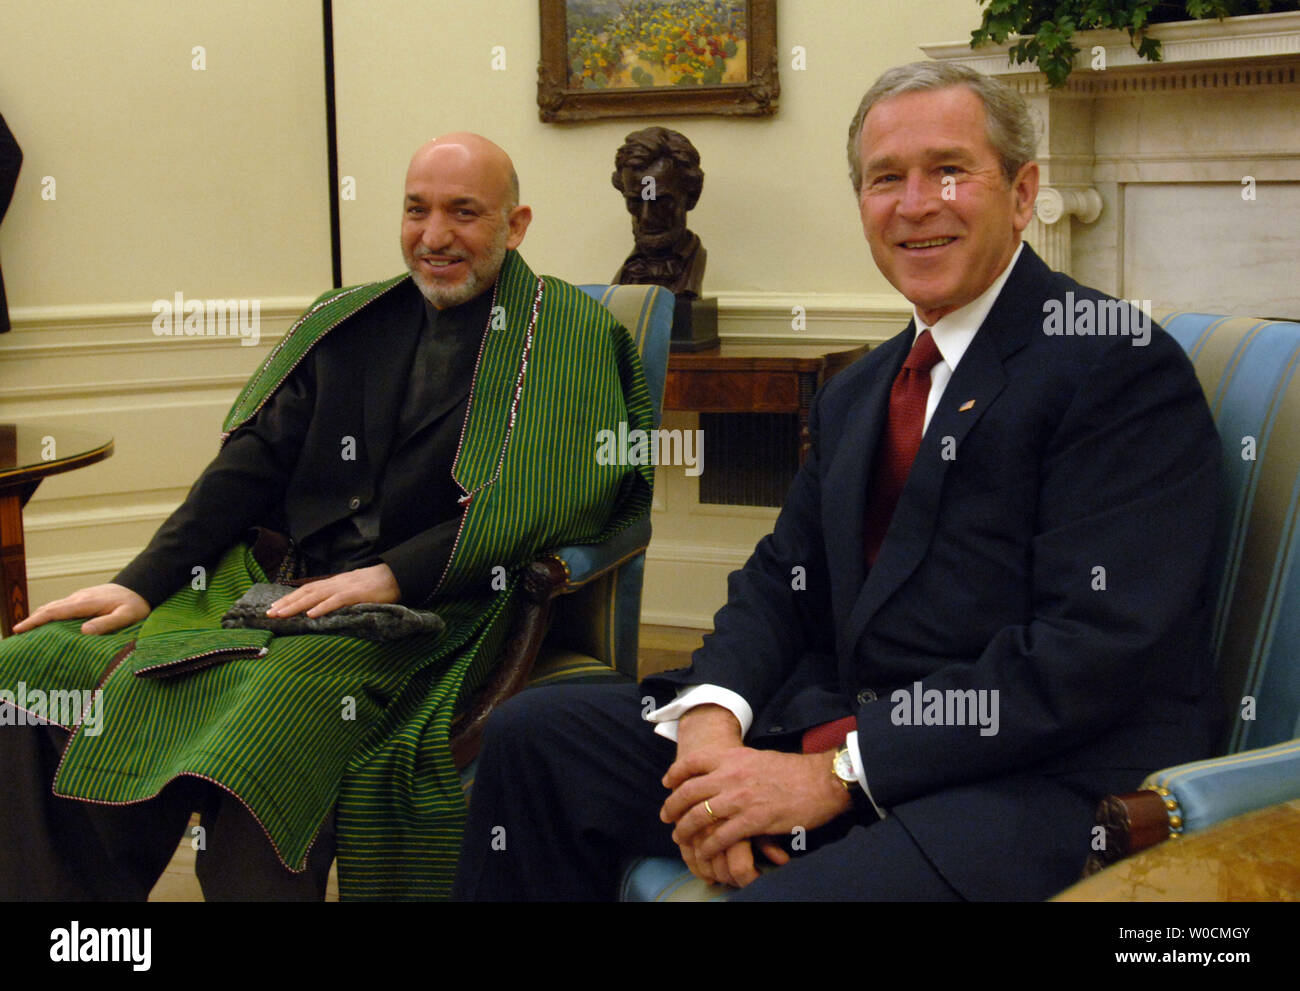 Afghan President Hamid Karzai, left, is welcomed to the oval office by President George W. Bush, on May 23, 2005 in Washington.  Bush and Karzai talked about prisoner abuse, drug production and the war in Iraq.  (UPI Photo/Michael Kleinfeld) Stock Photo